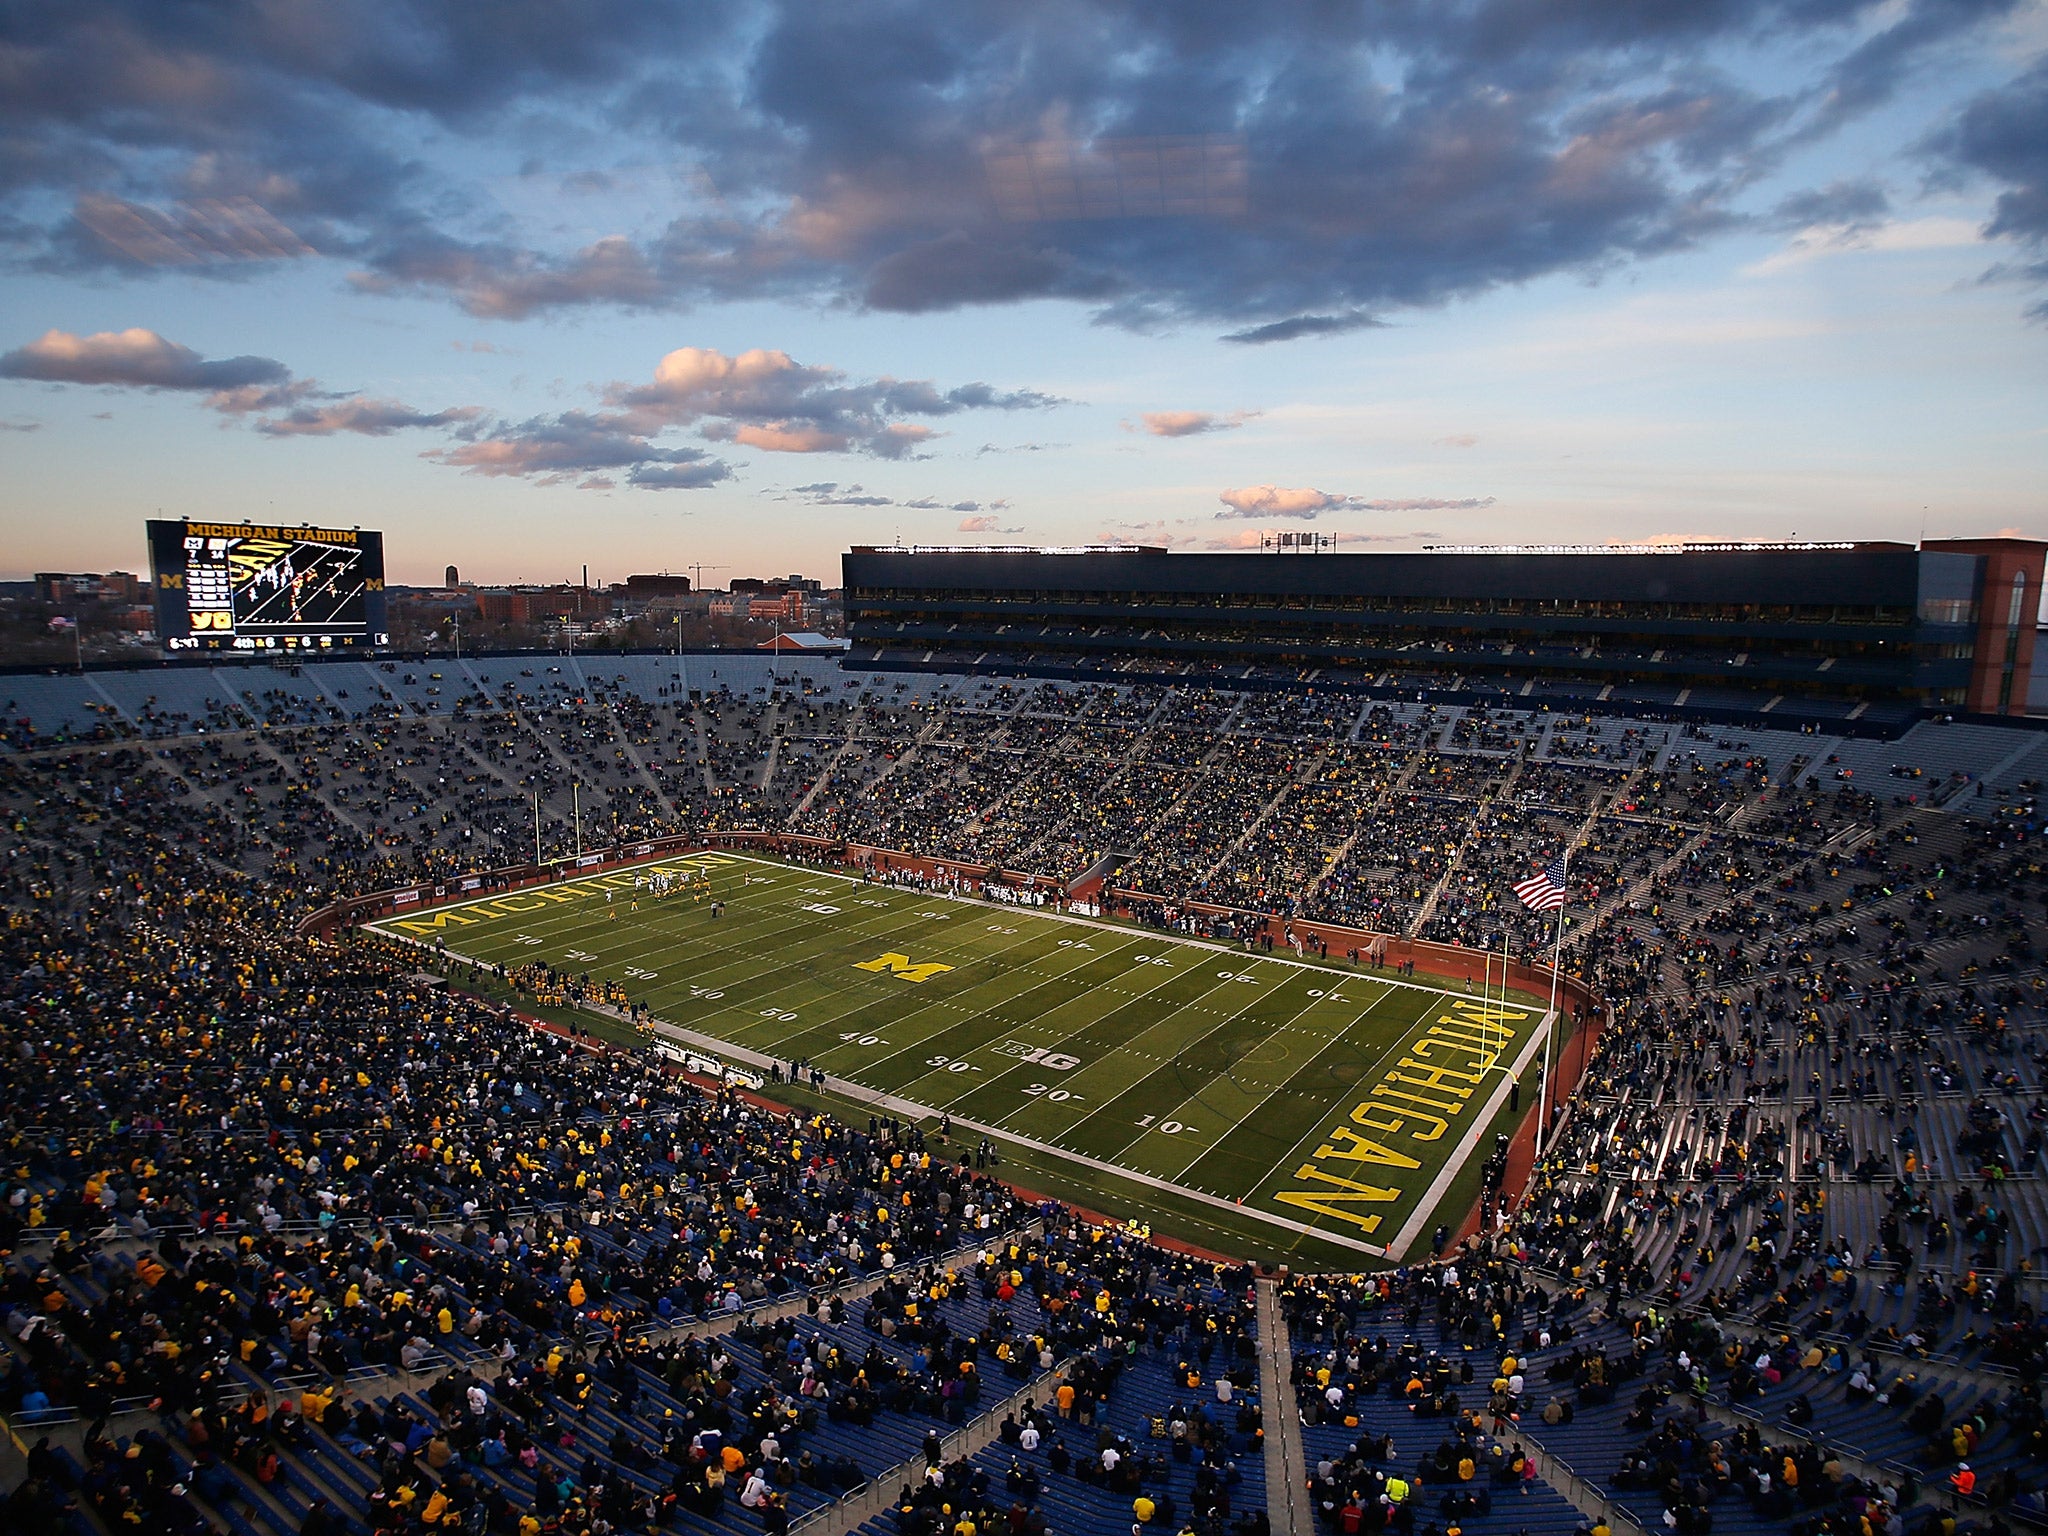 Chelsea are scheduled to face Real Madrid at the Michigan Stadium